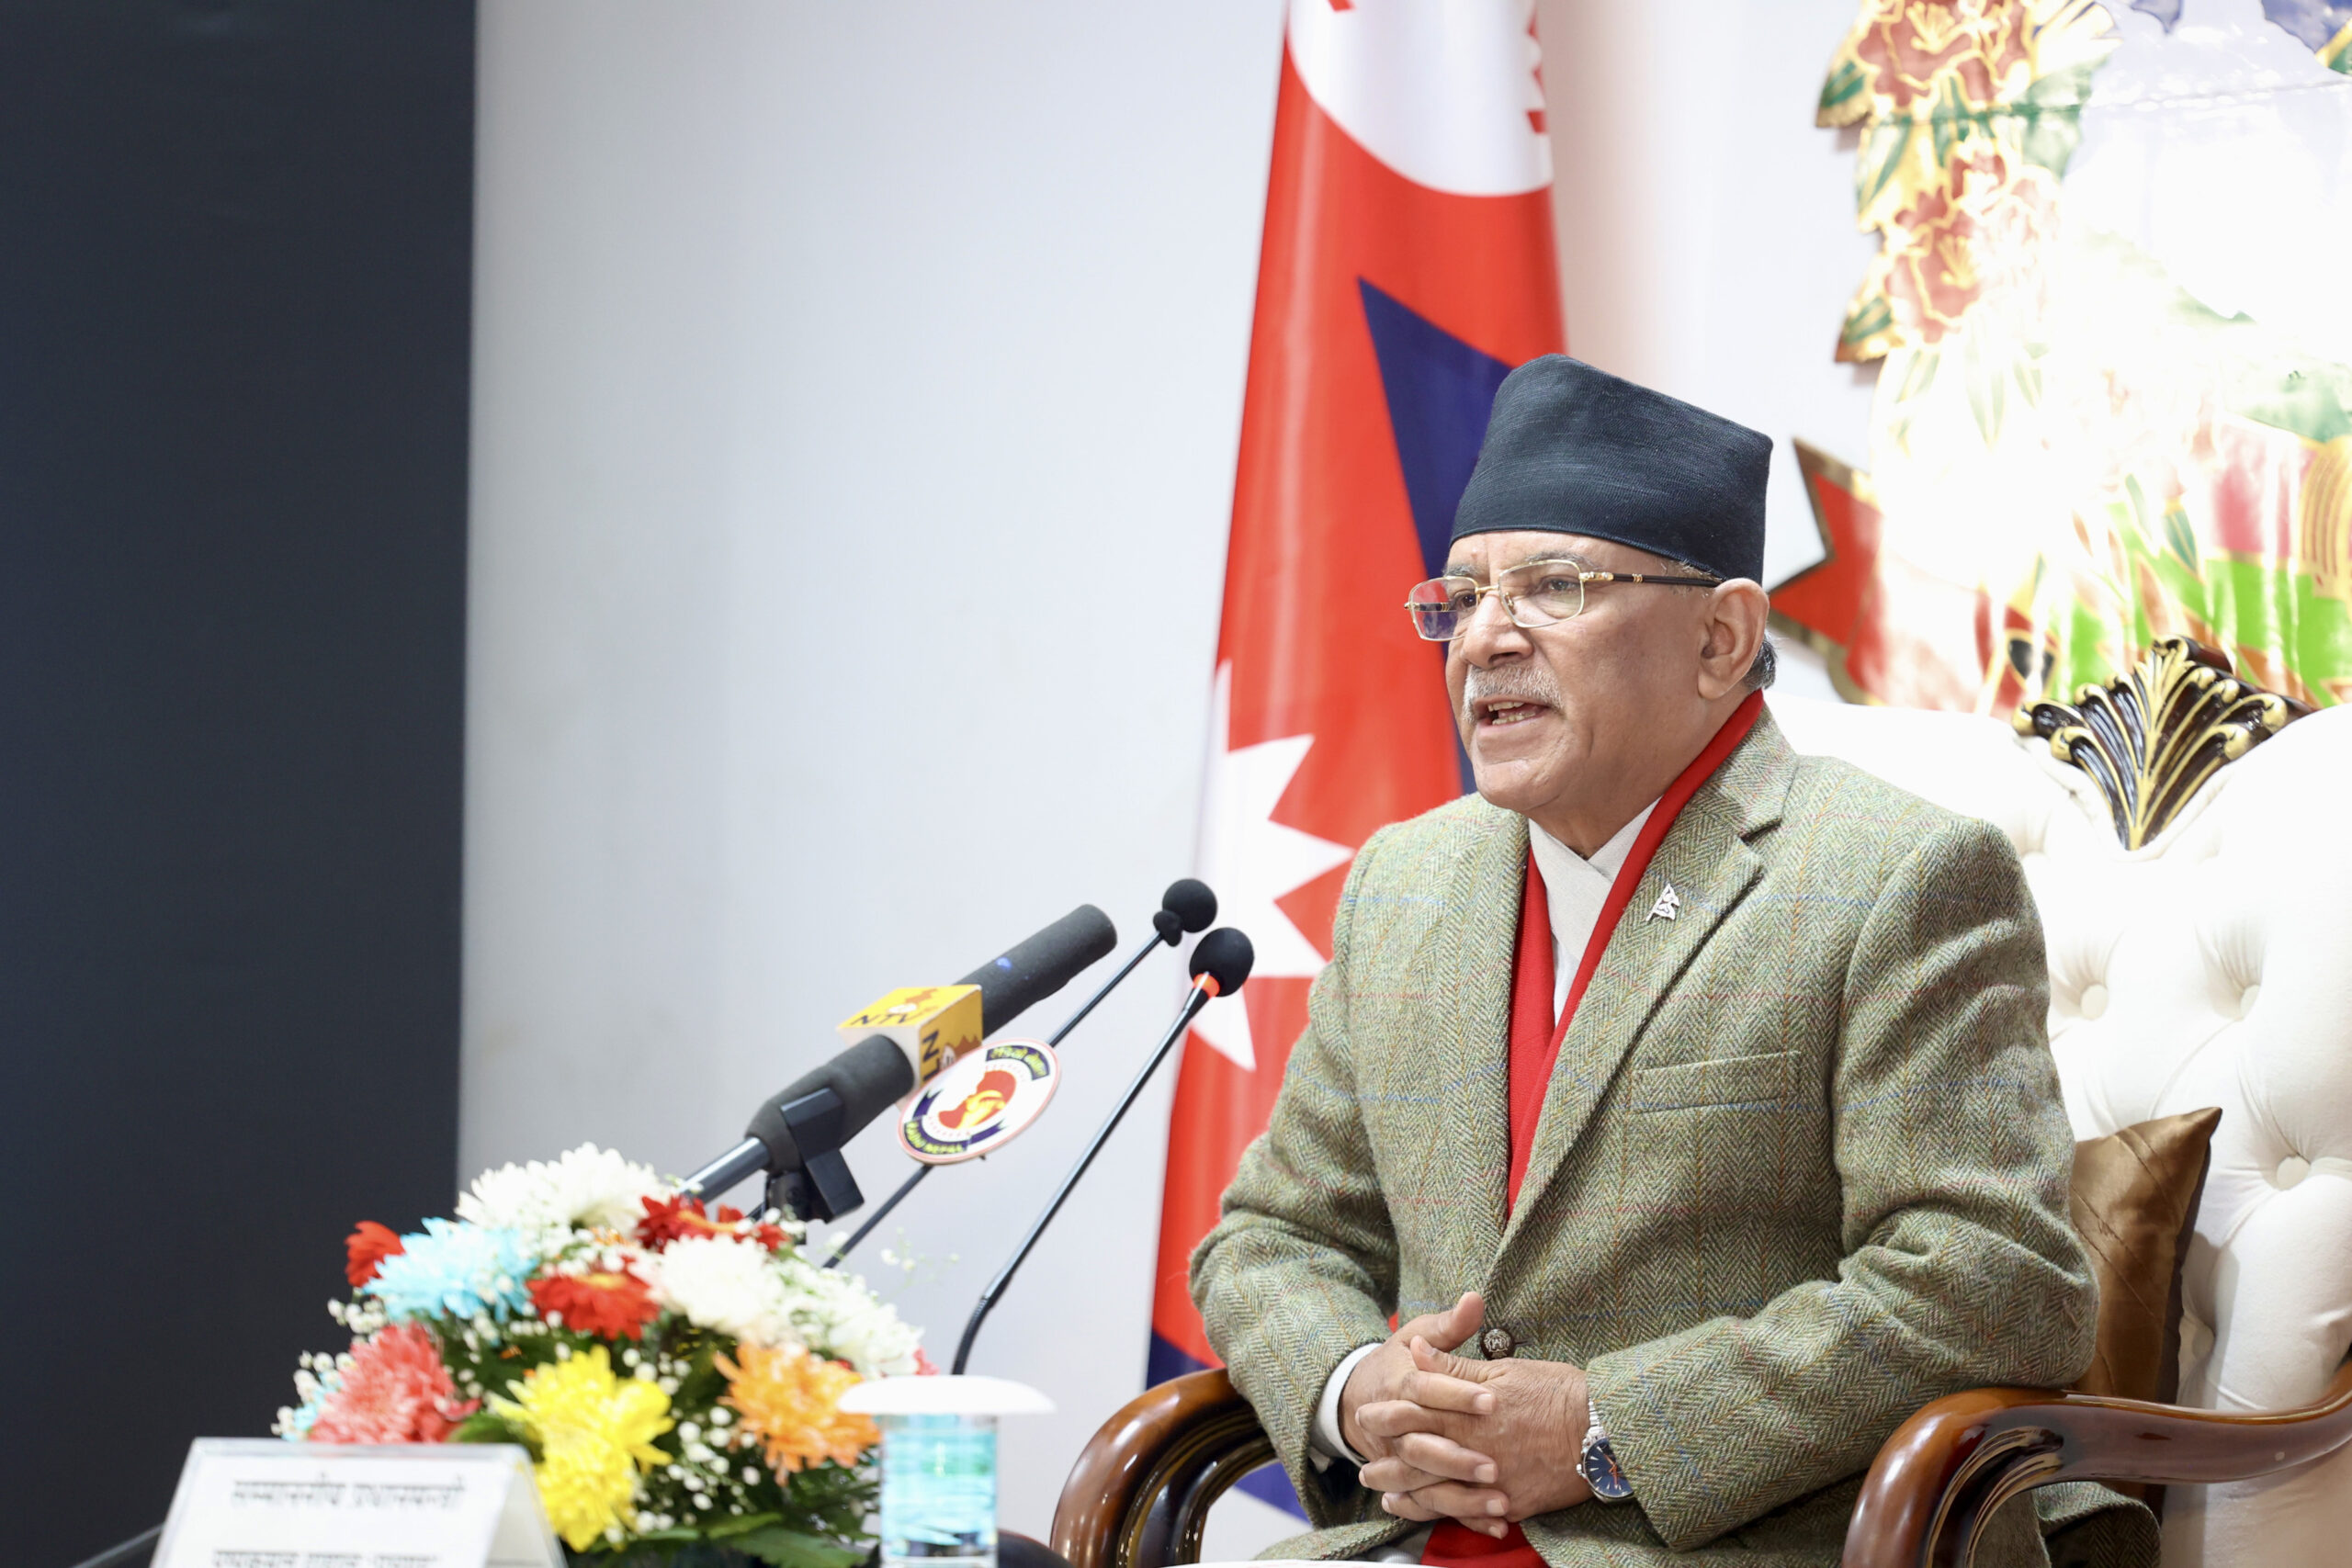 Royal Massacre 2001 will be subject to reinvestigation: Prime Minister Dahal